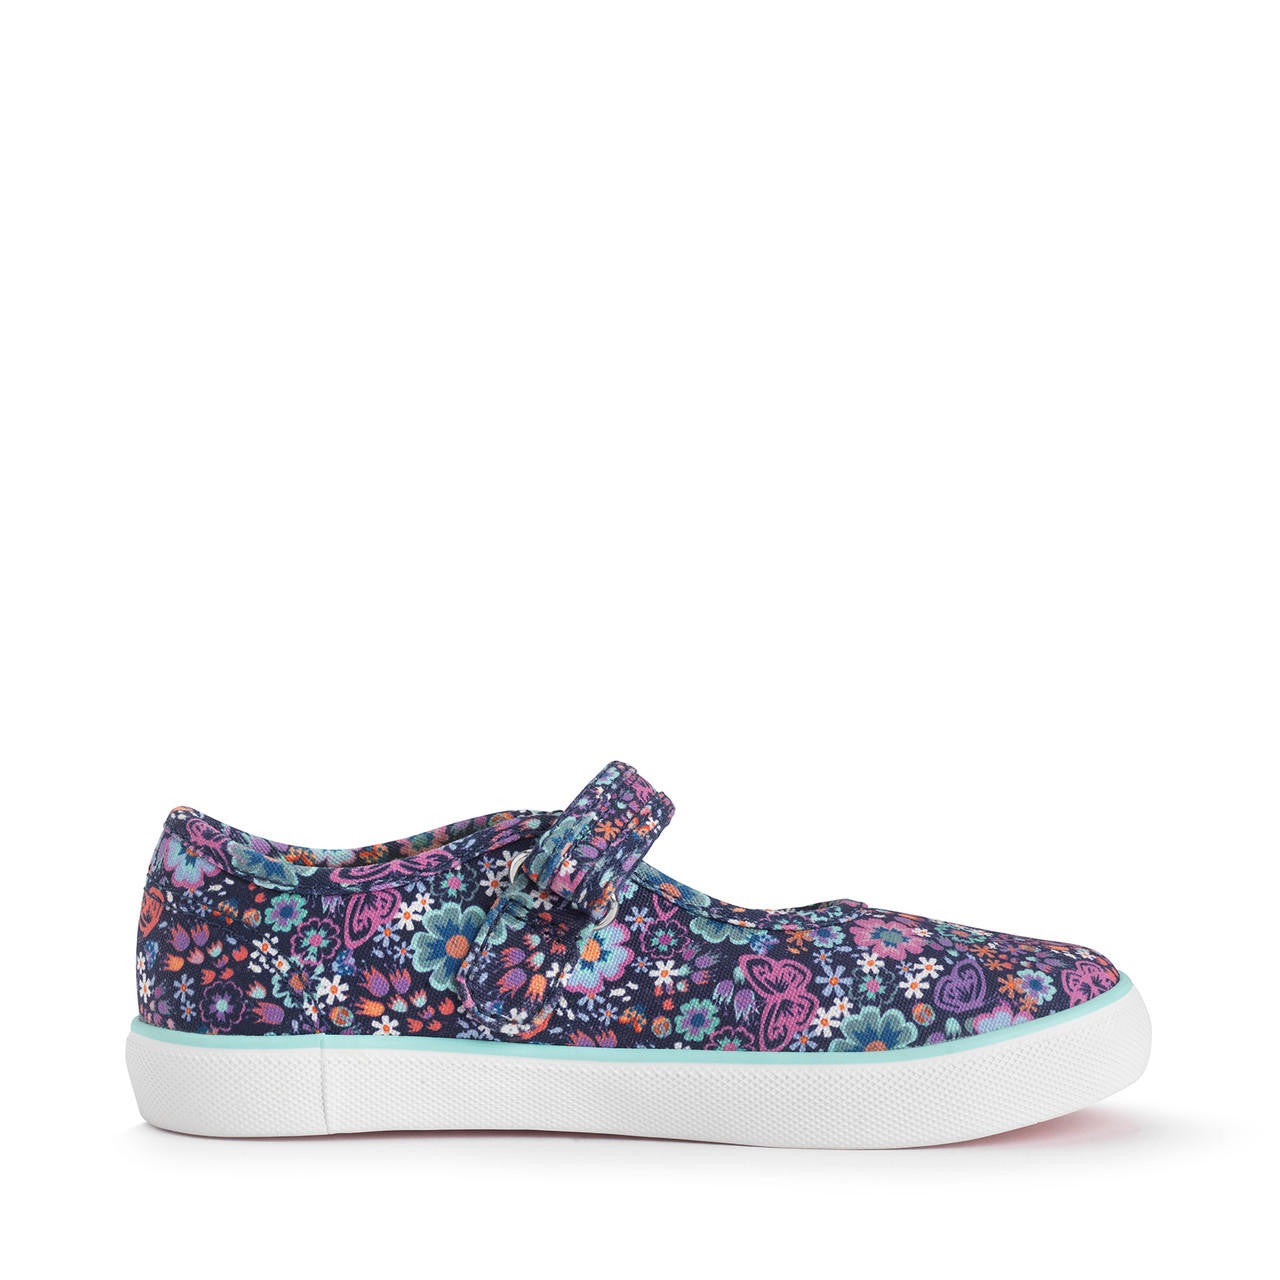 StartRite BUSY LIZZIE Canvas Shoes (Navy Floral) 25-30